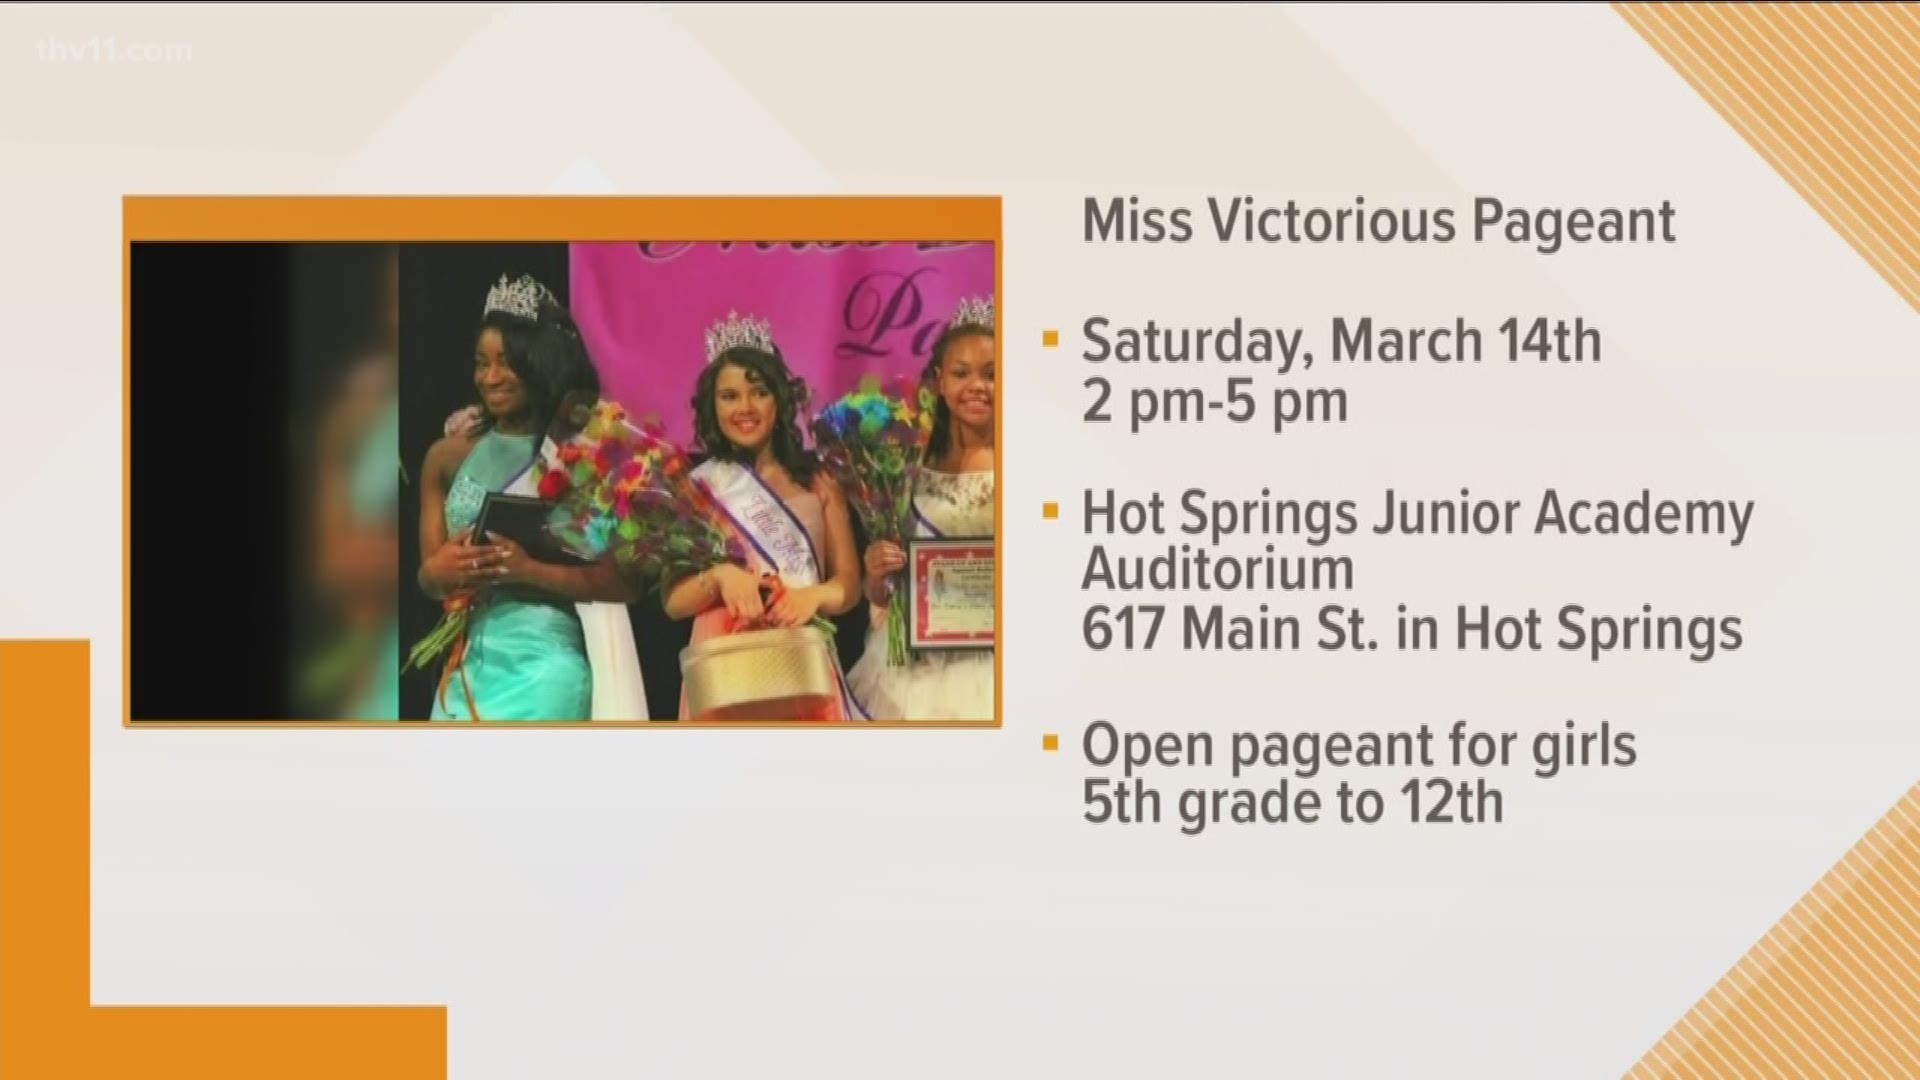 Get ready for the 6th Annual Miss Victorious Pageant. They need girls who want to make a difference in their school and community.